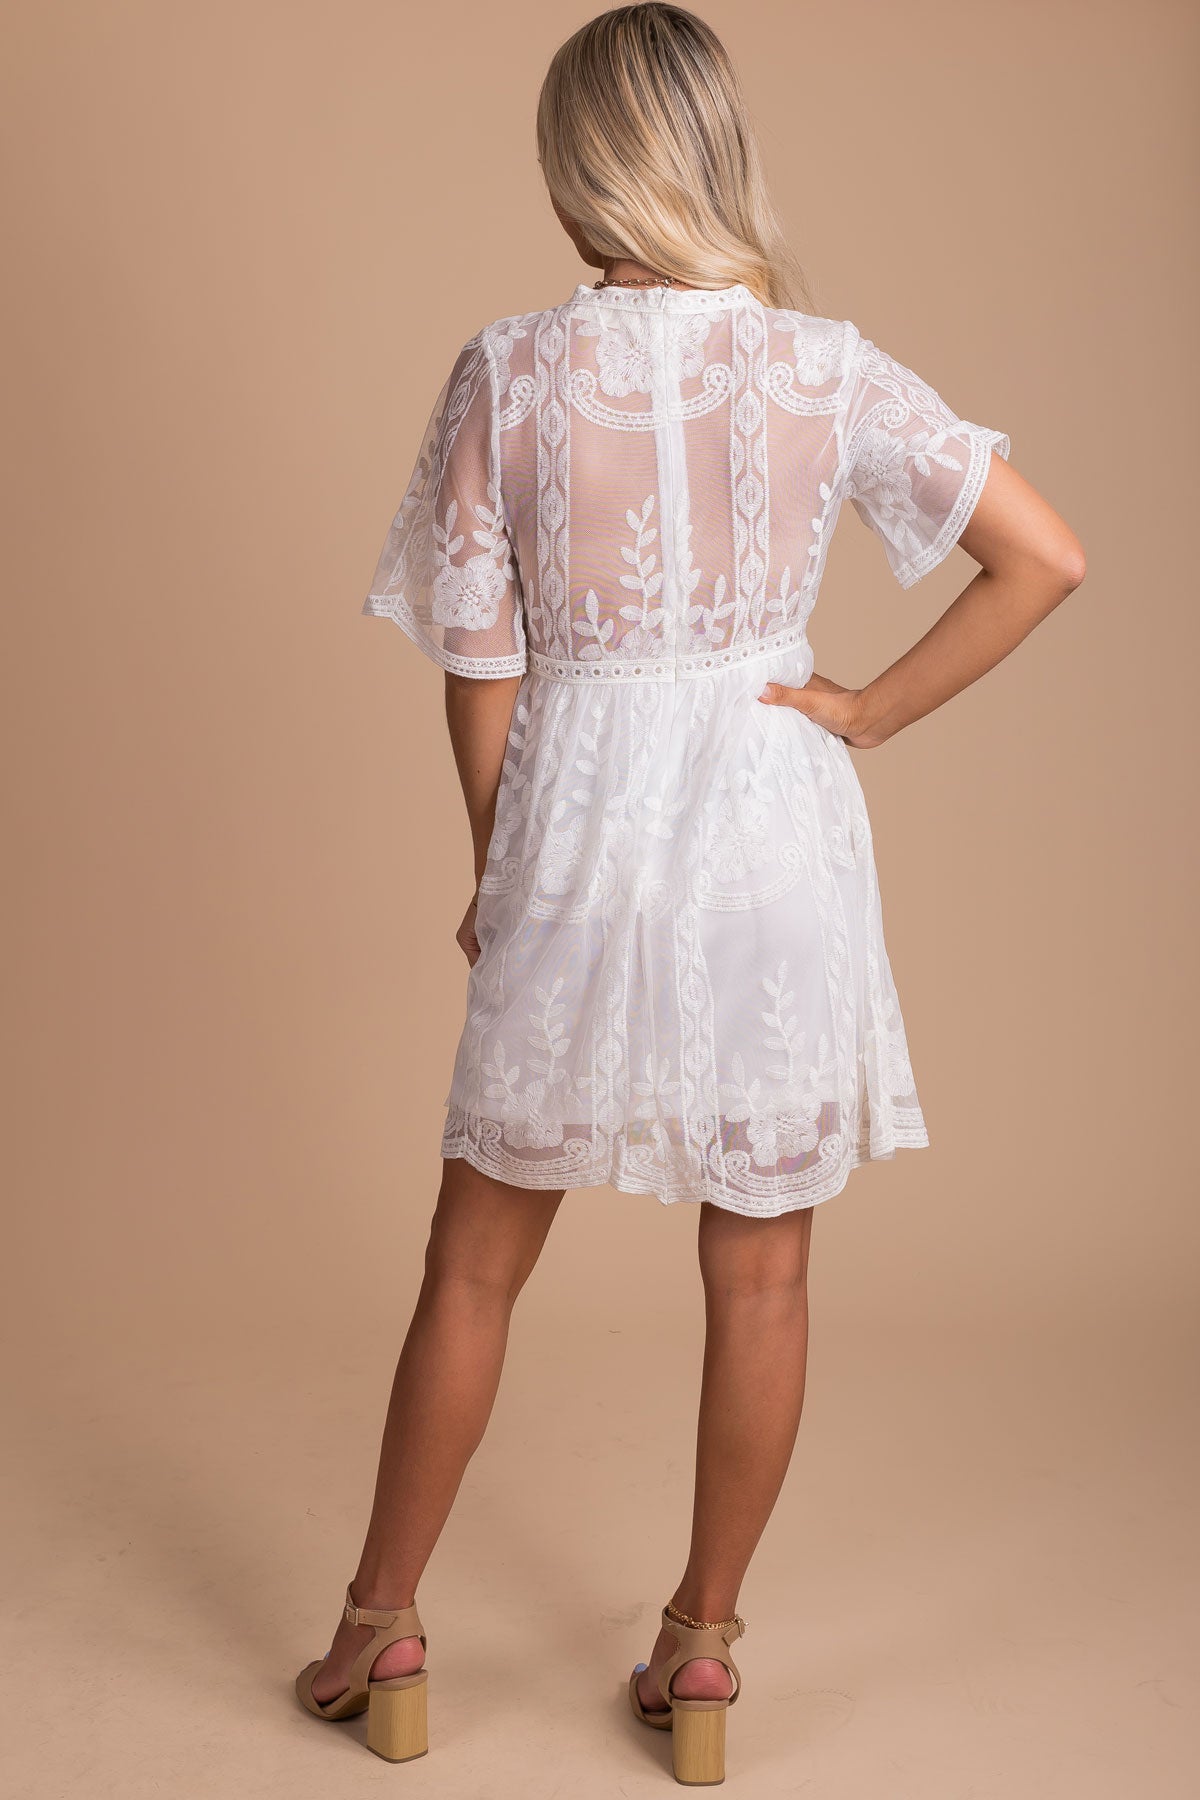 White Crochet Floral Lace Overlay Mini Dresses with Flowy Sleeves and See Through Back